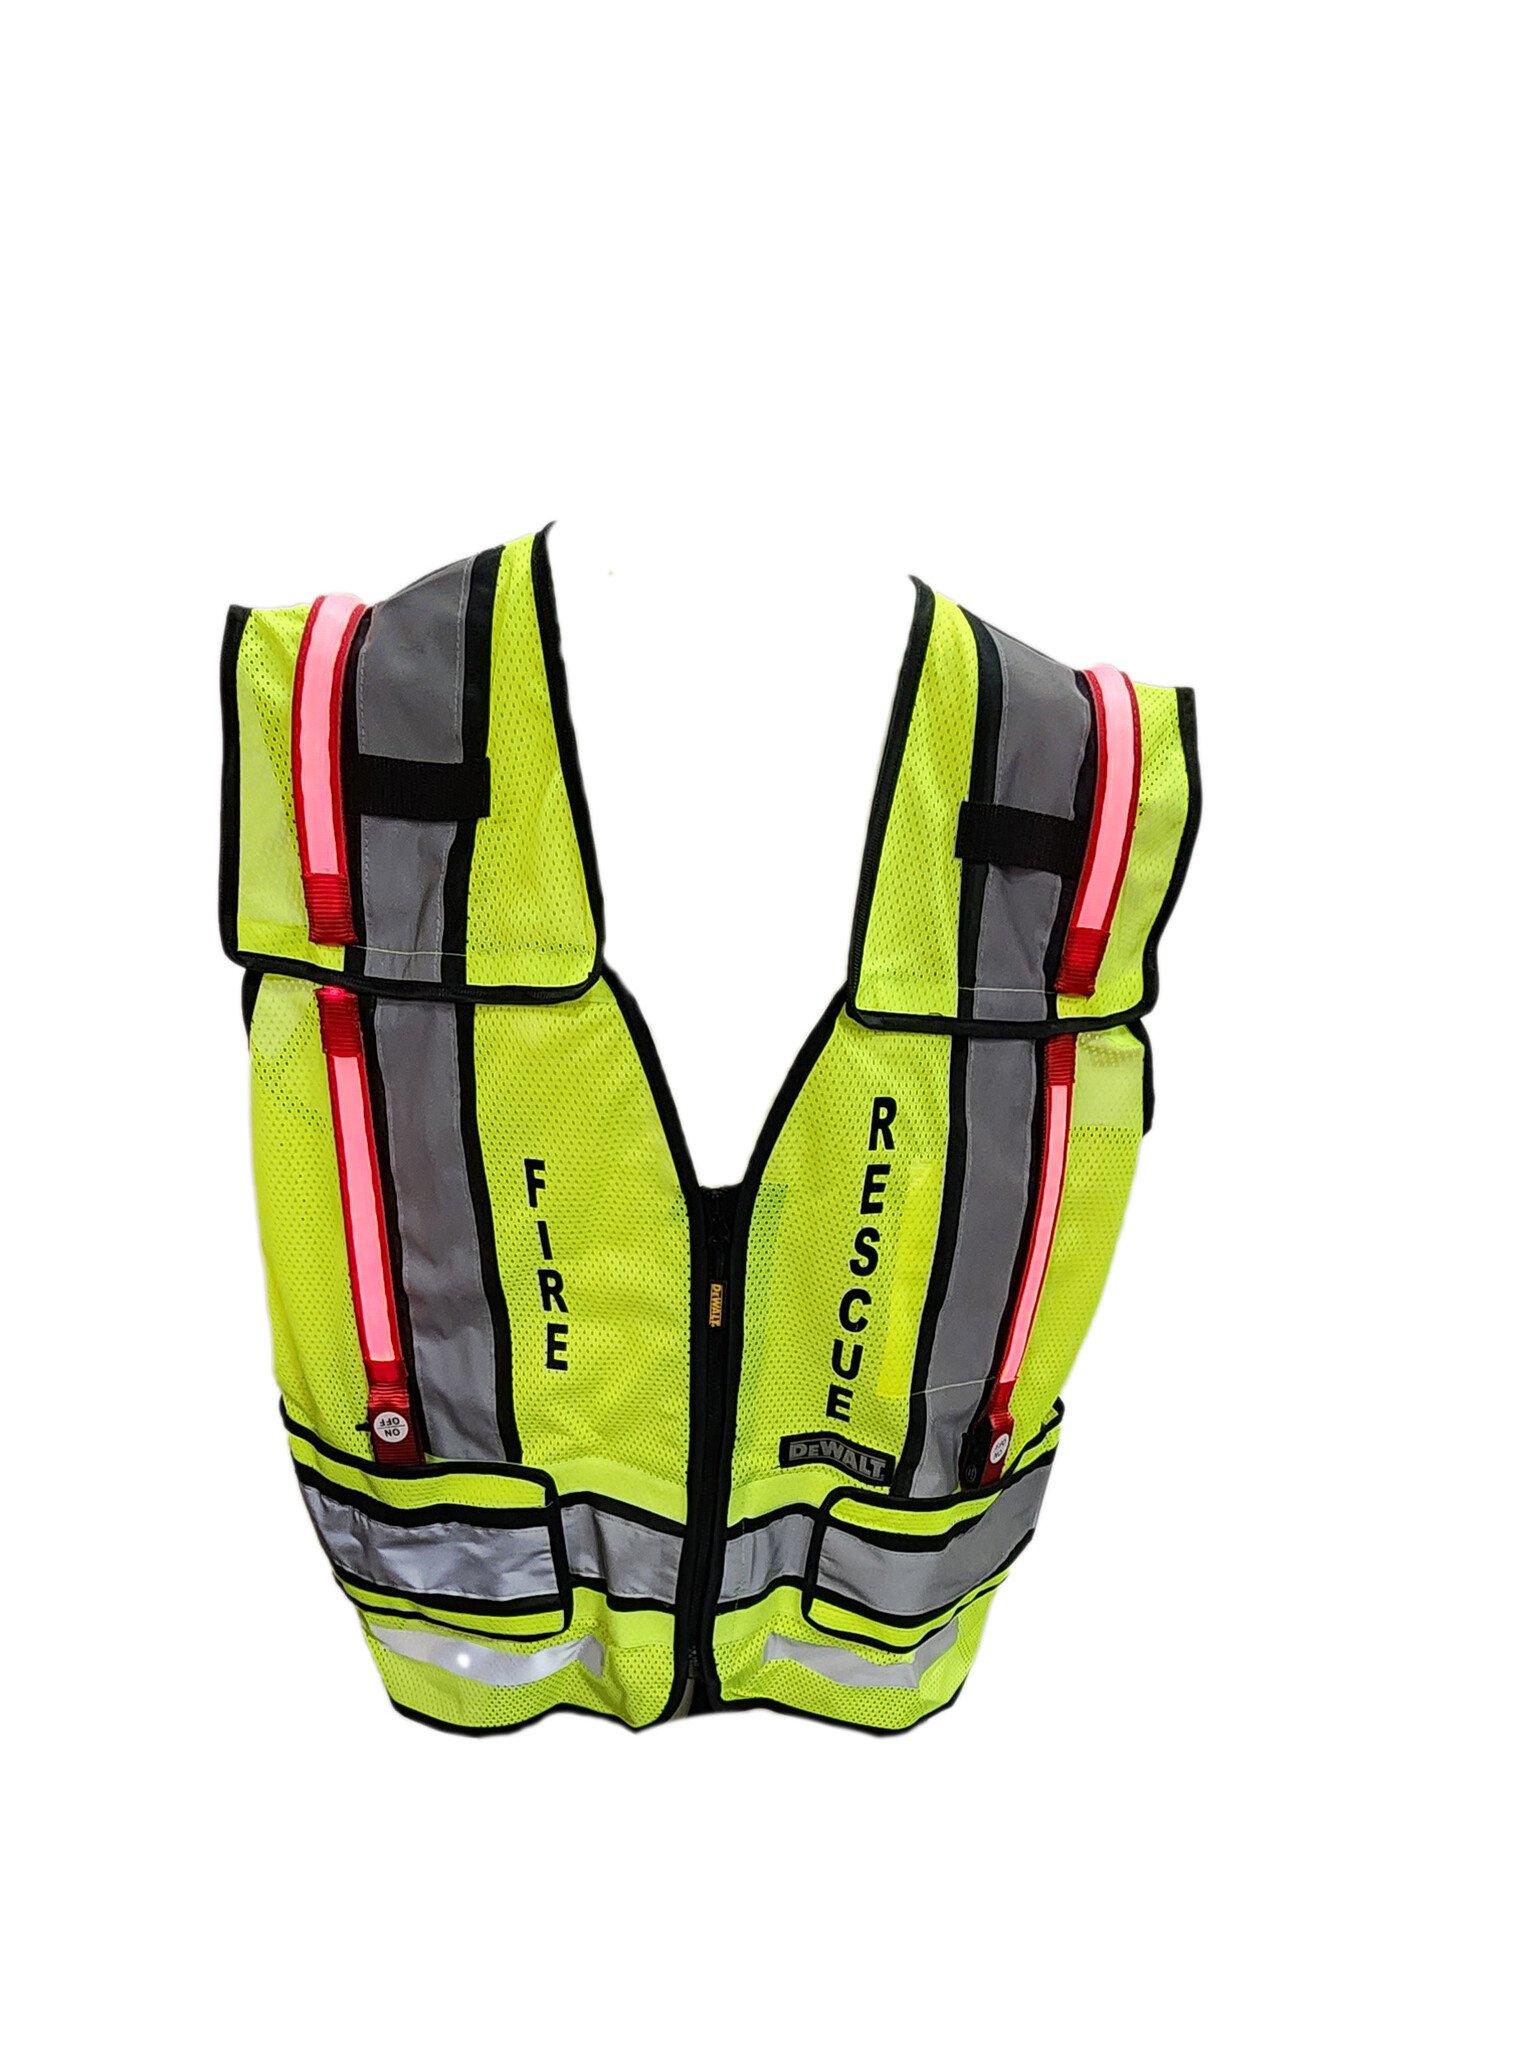 Night Light Safety Products,LLC NLSP FireRescue LED Fiber Optic Lighted 5-Point Vest